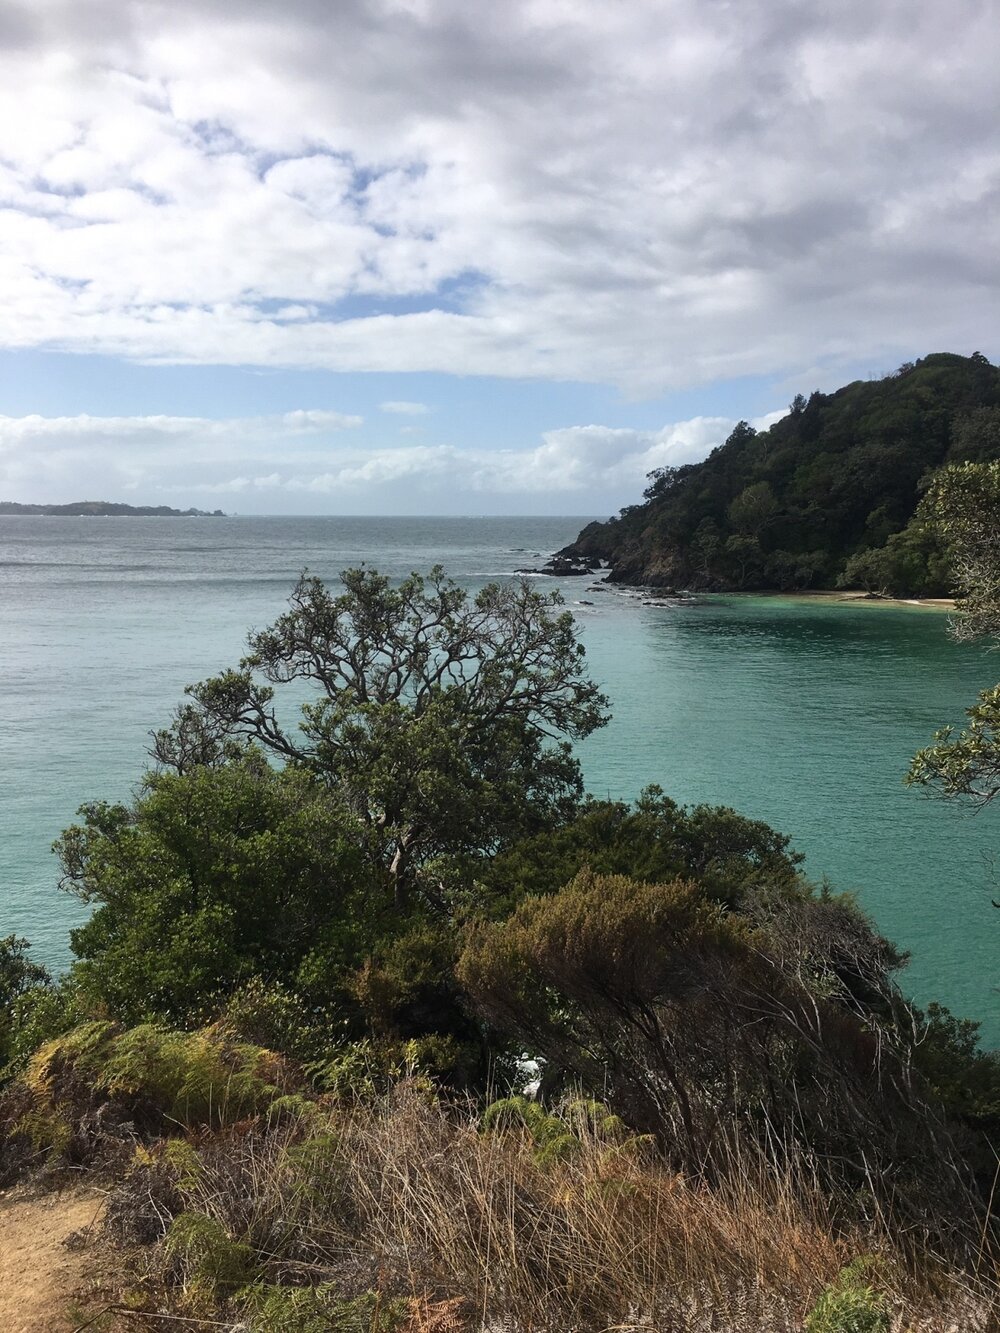 Views of the blue-green ocean from Whale Bay hiking trail in New Zealand